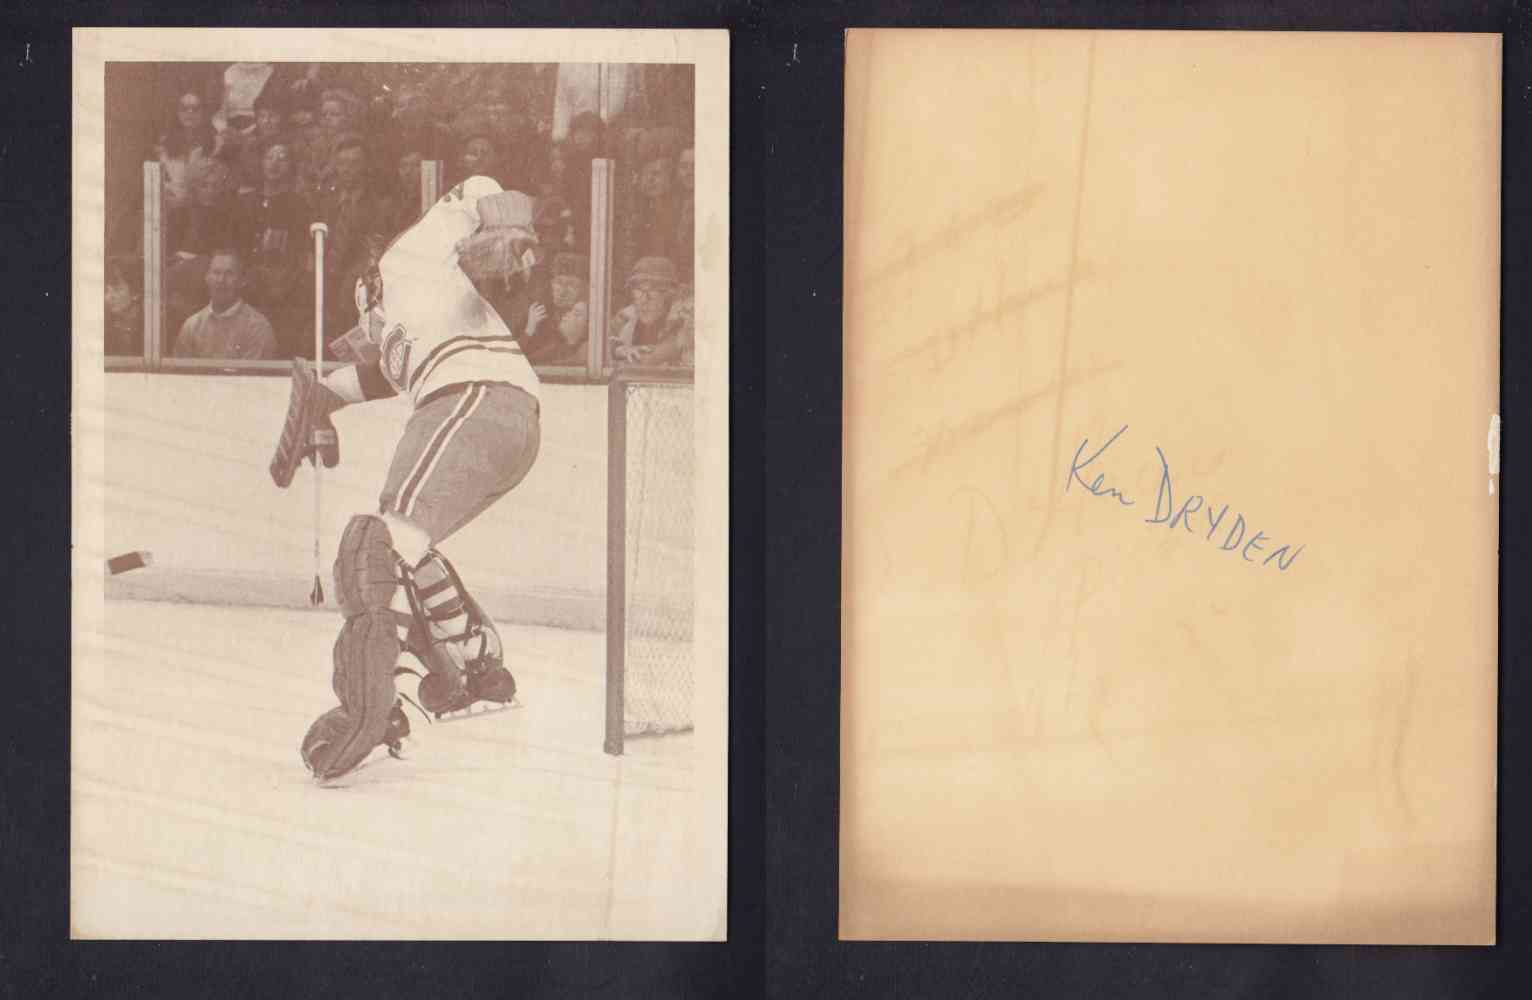 EARLY 1970'S MONTREAL CANADIENS K. DRYDEN PHOTO photo